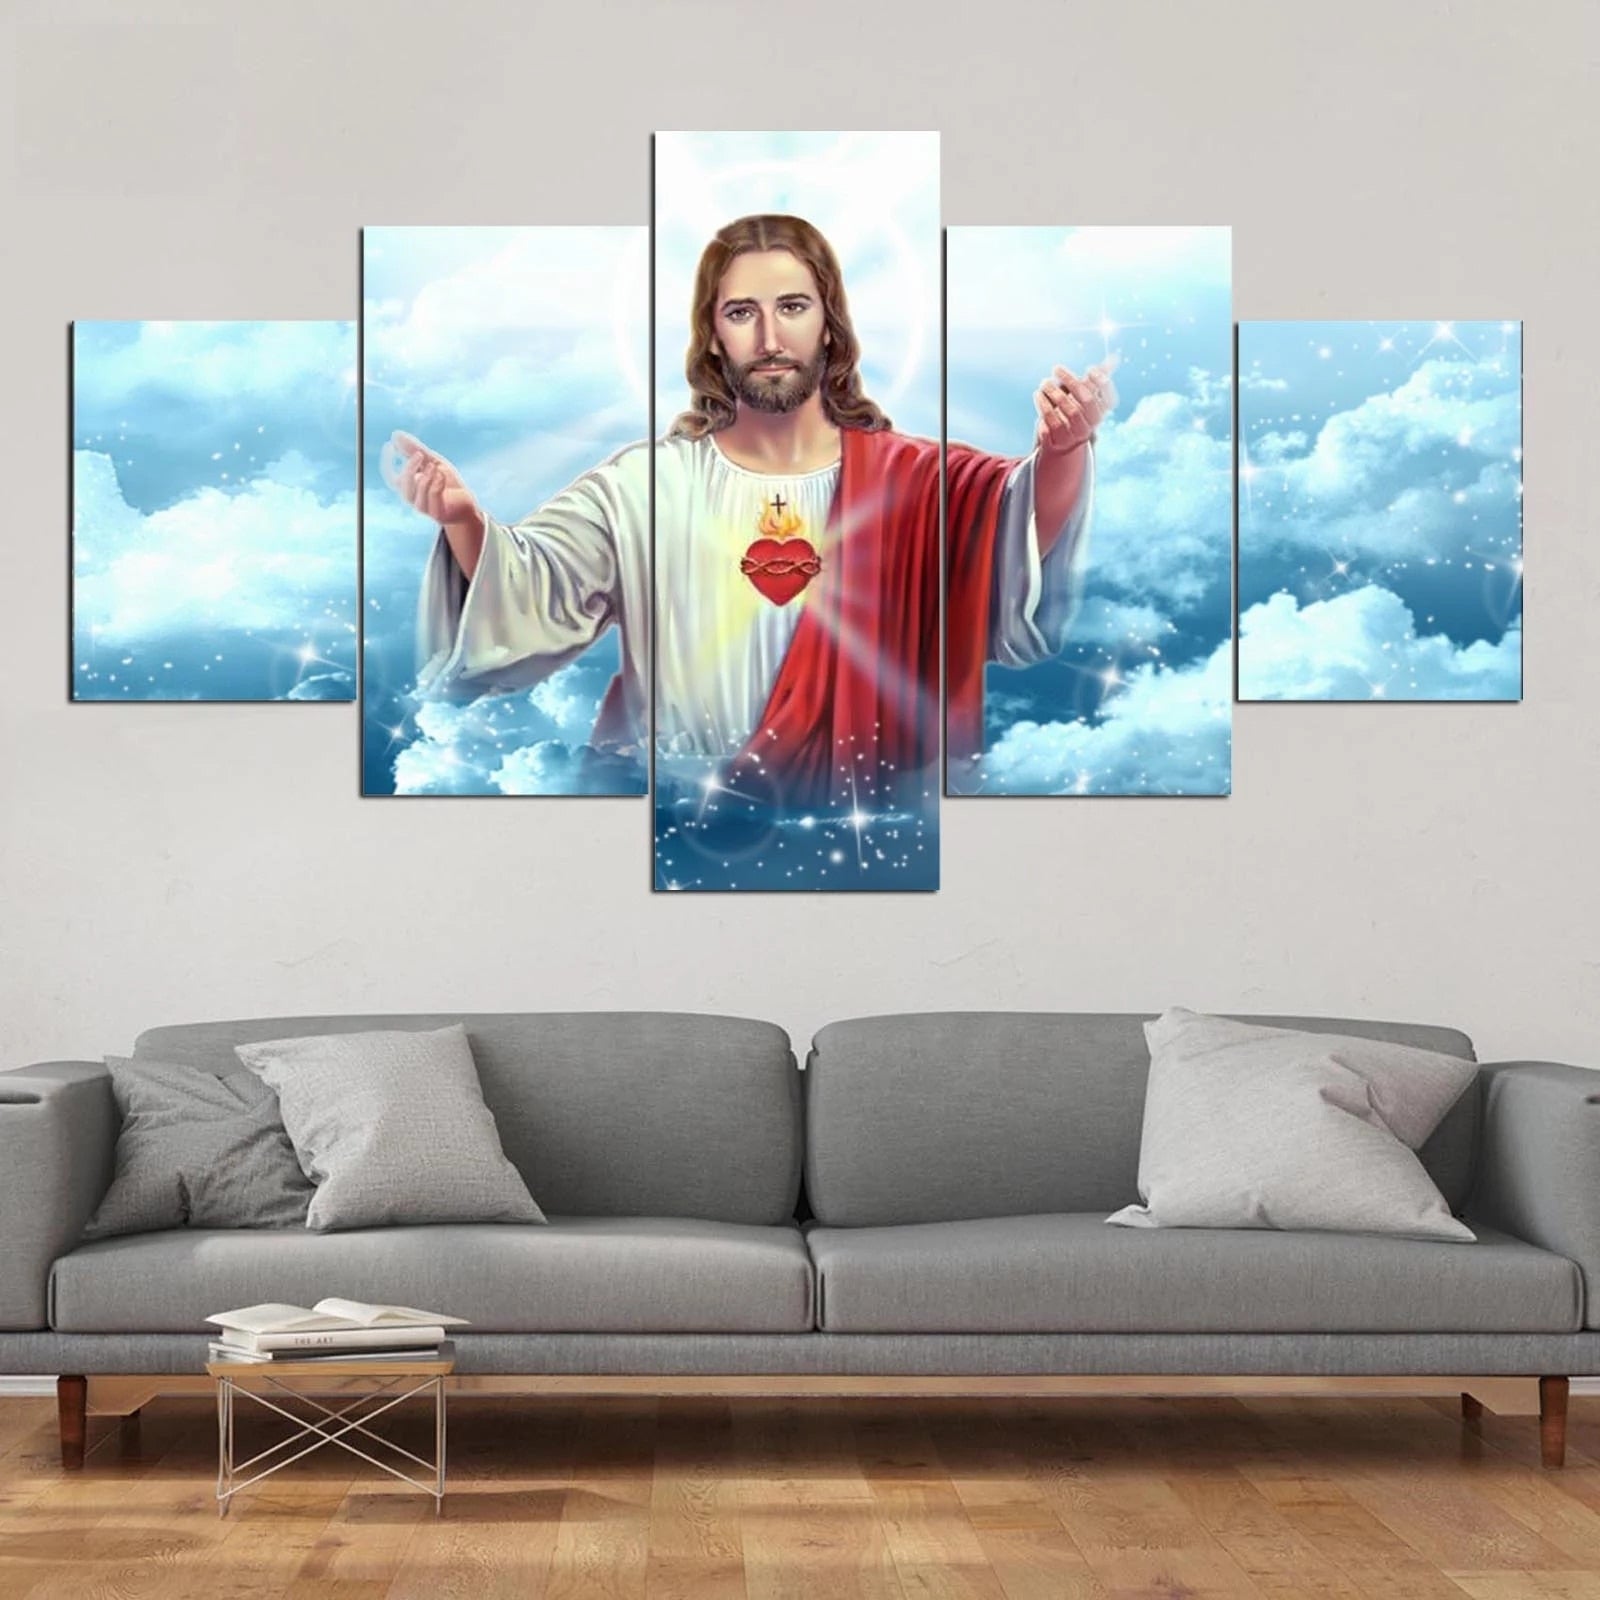 Canvas Heart Of Jesus Painting